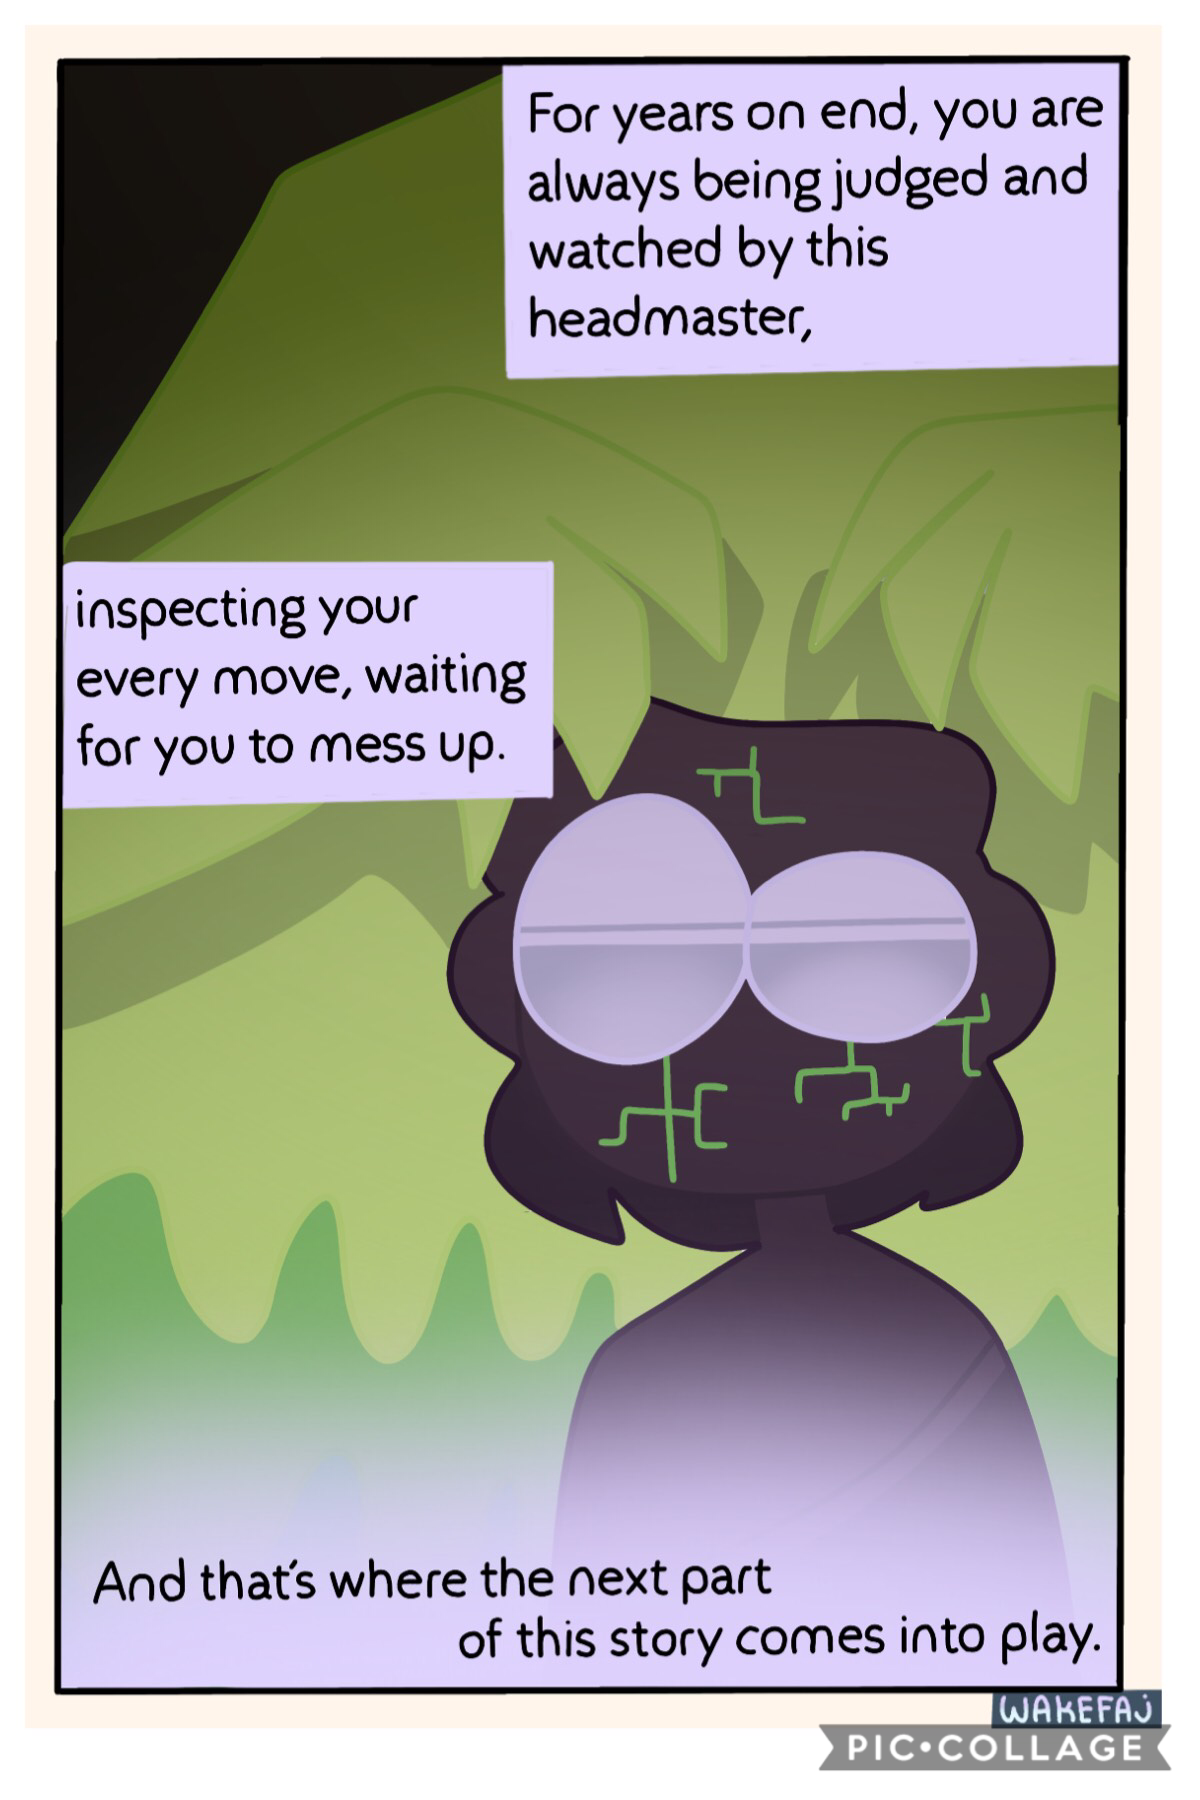 xX_Tap The Text Please!_Xx
I DID THIS IN HALF AN HOUR THIS MORNING AS I REALISED THAT “OH MY GOSH DARN IT’S WEDNSAY I GOTTA POST DIS COMIC” lol so that was fun anyway stick around folks the prologue only gets more intense form here! 😋